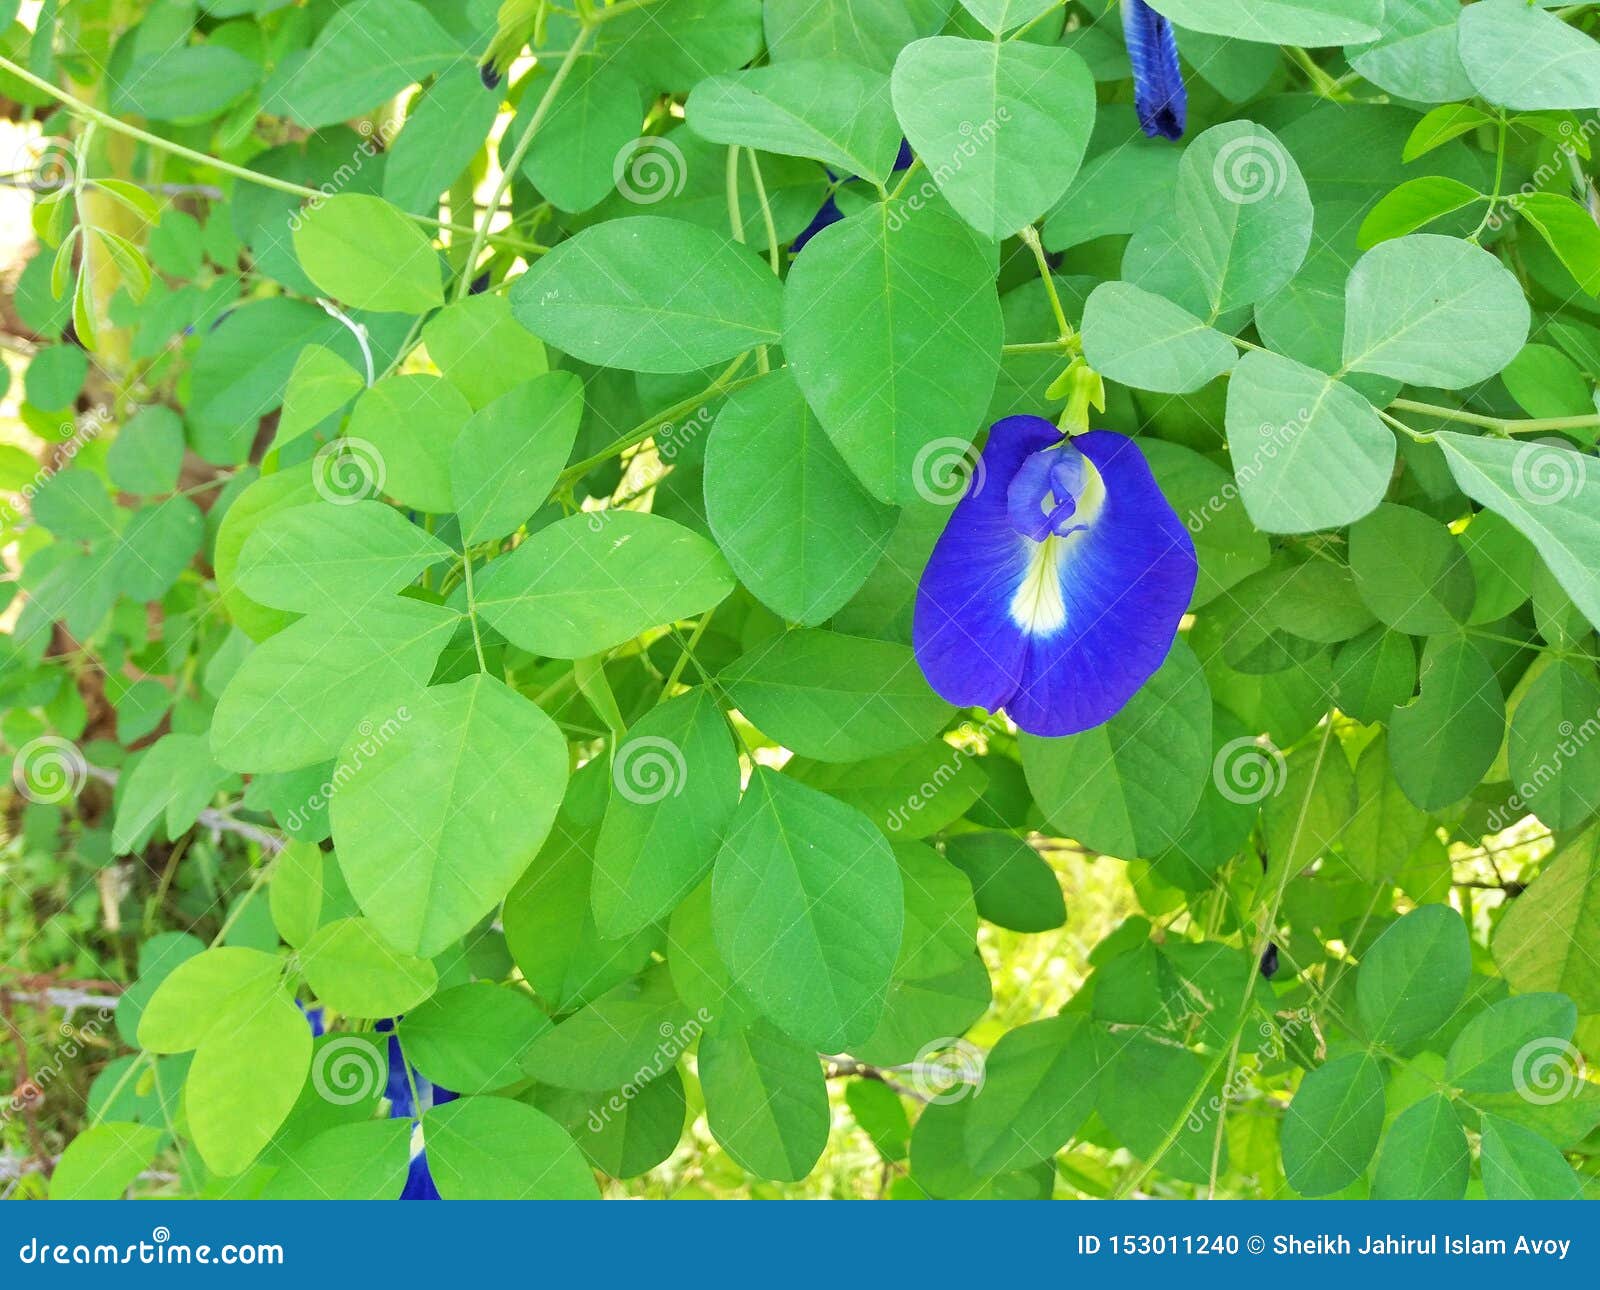 Beautiful Blue Beach Moon Flower In The Garden Stock Photo Image Of Background Blue 153011240